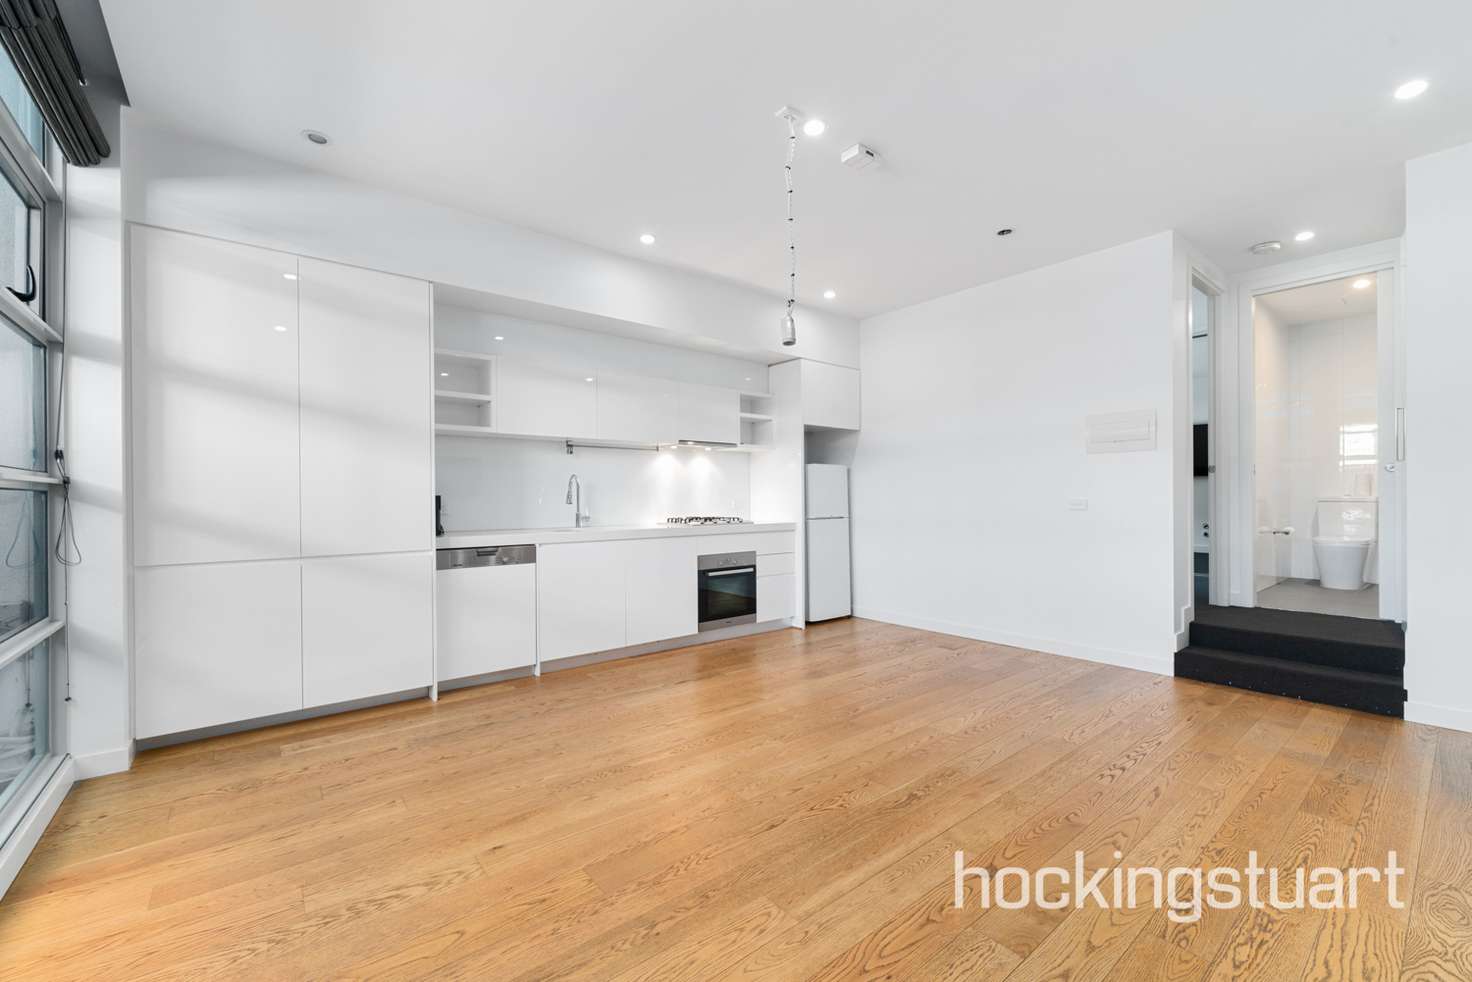 Main view of Homely apartment listing, 1/38 Nott Street, Port Melbourne VIC 3207